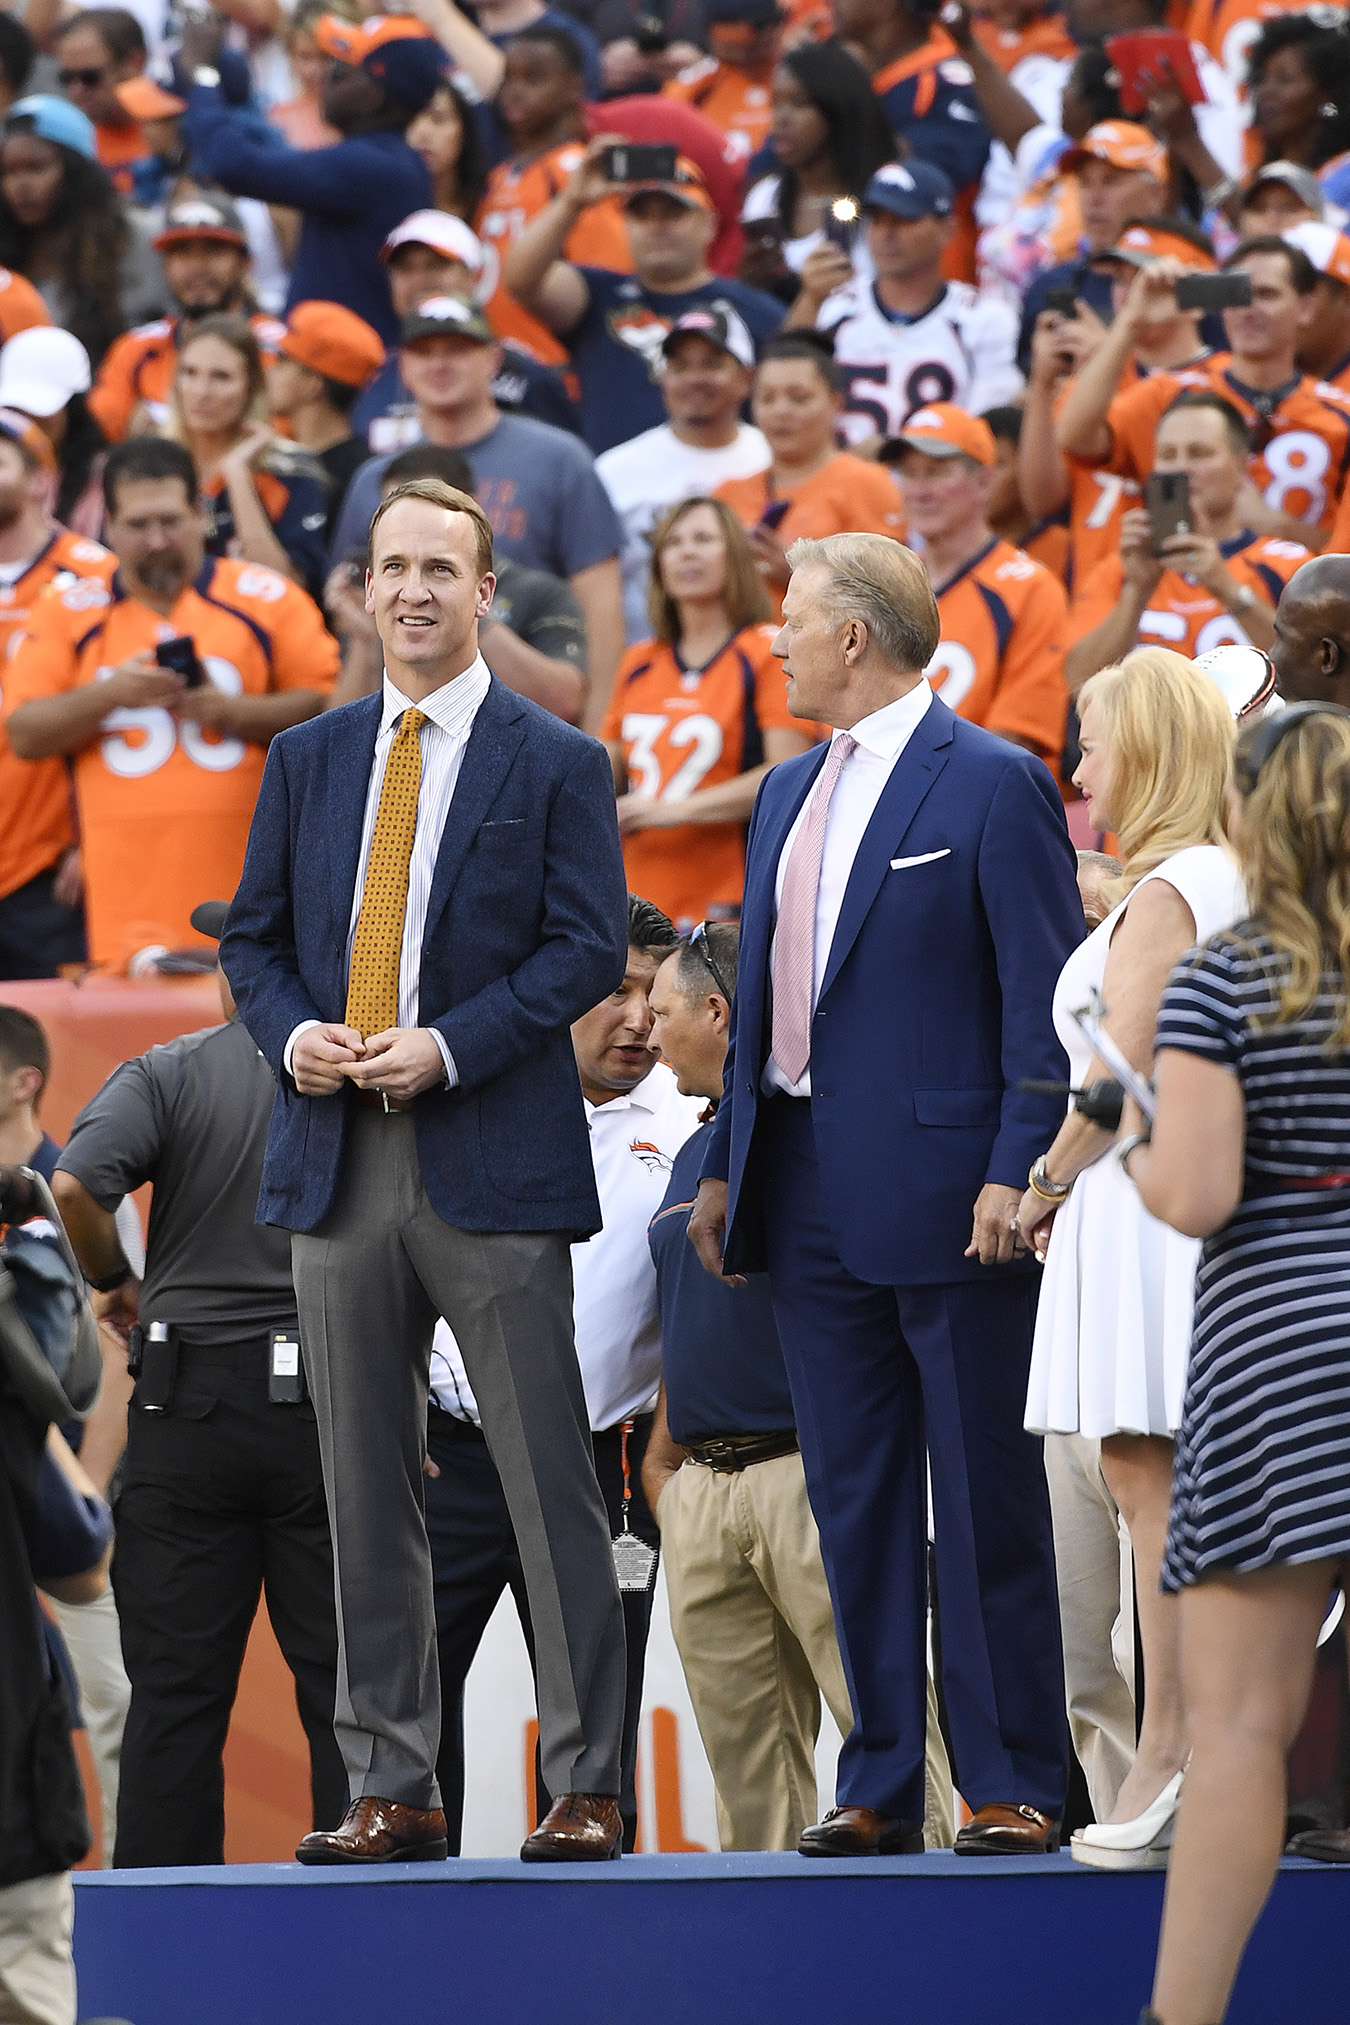 Former Broncos quarterbacks and Super Bowl Champions Peyton Manning and John Elway during a ceremony honoring the franchise's three Super Bowl titles on Sept. 8, 2016, in Denver.